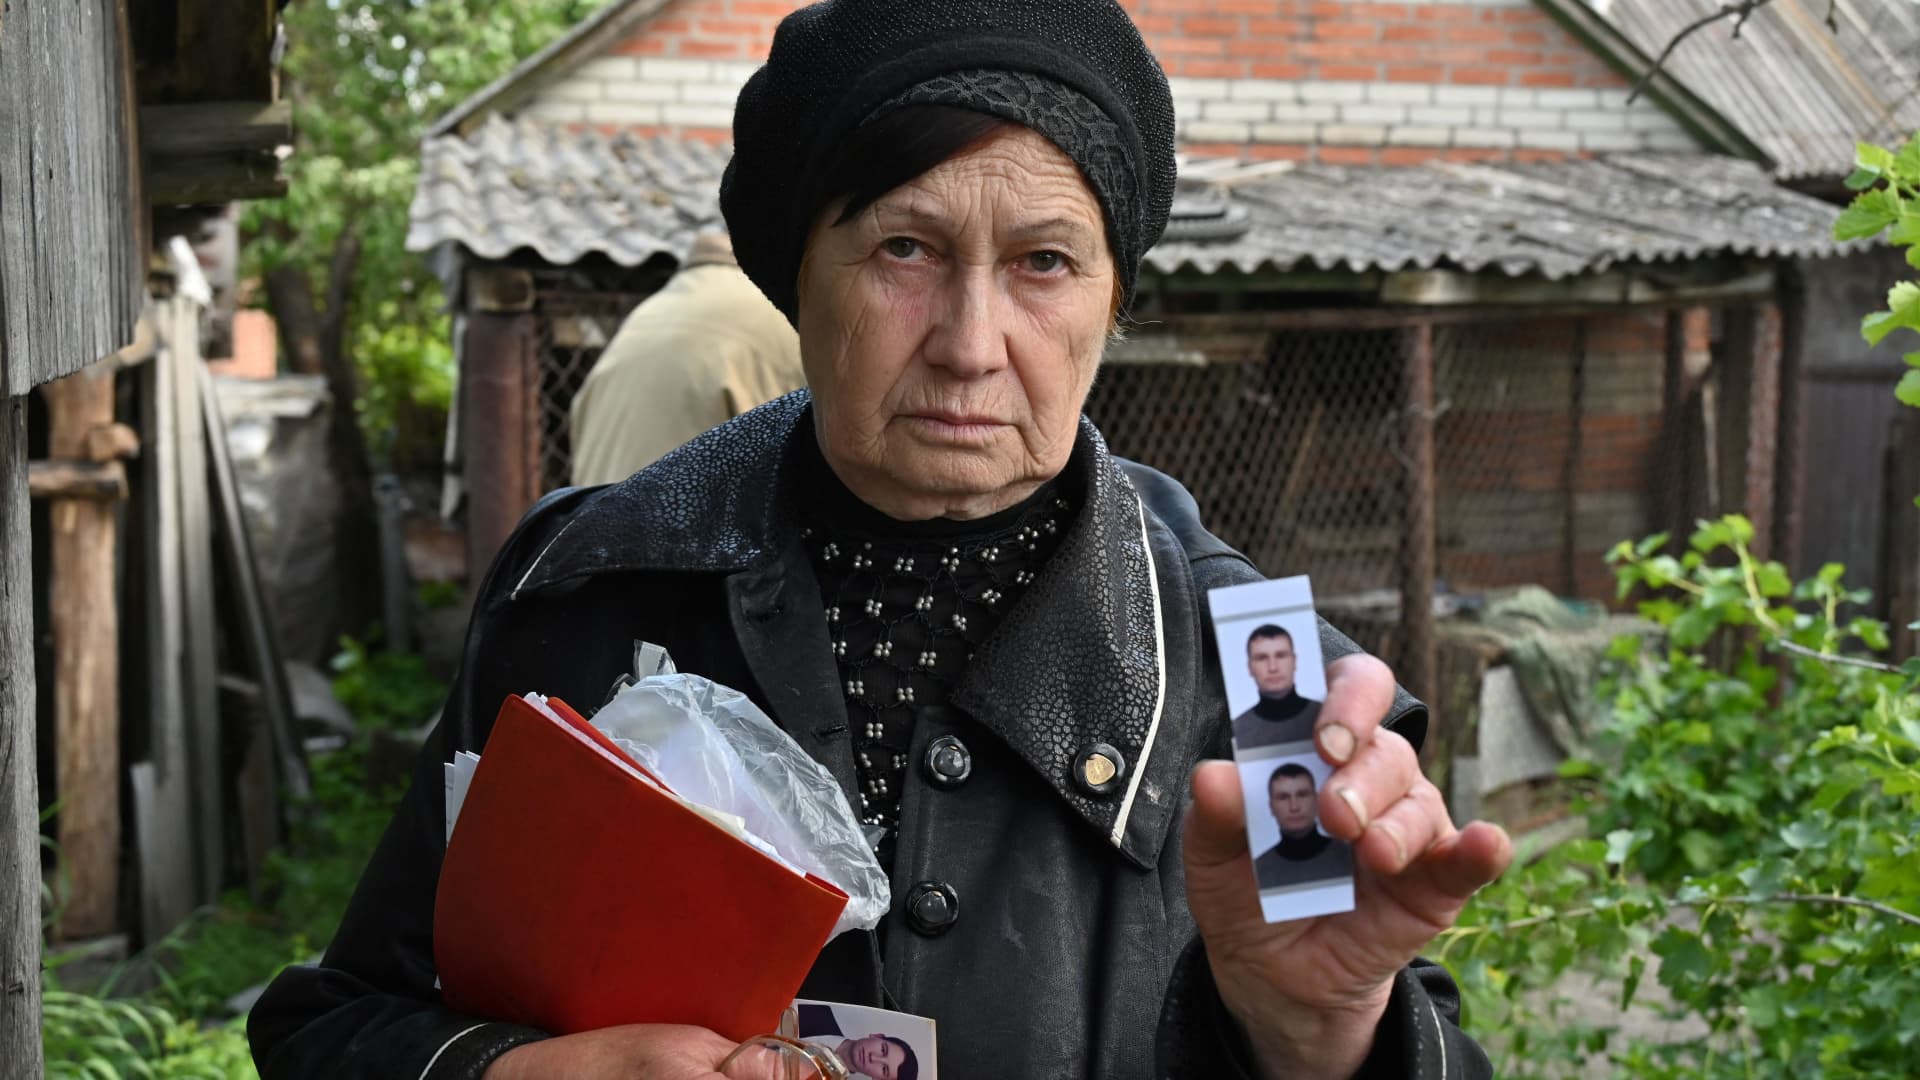 Olga Khomenko, 67, shows pictures of her son, a 38-year-old local man who allegedly died when his car was hit by a shell of Russian tank and was buried in the courtyard of his house while Ukrainian police forensics exhum his remains in the village of Mala Rogan, near Kharkiv on May 23, 2022.